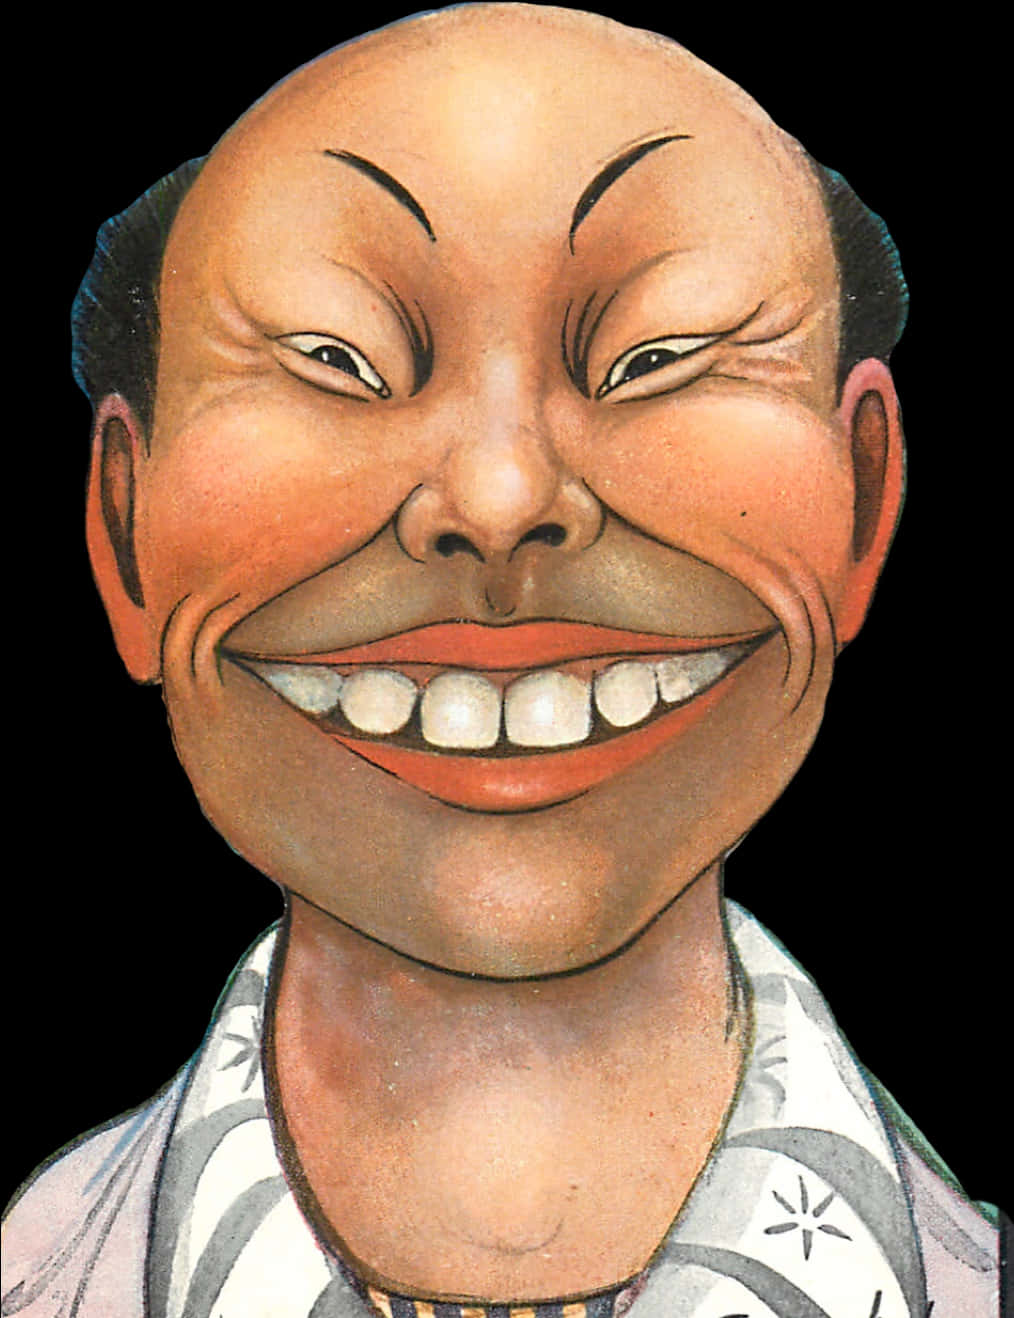 Exaggerated Smiling Caricature